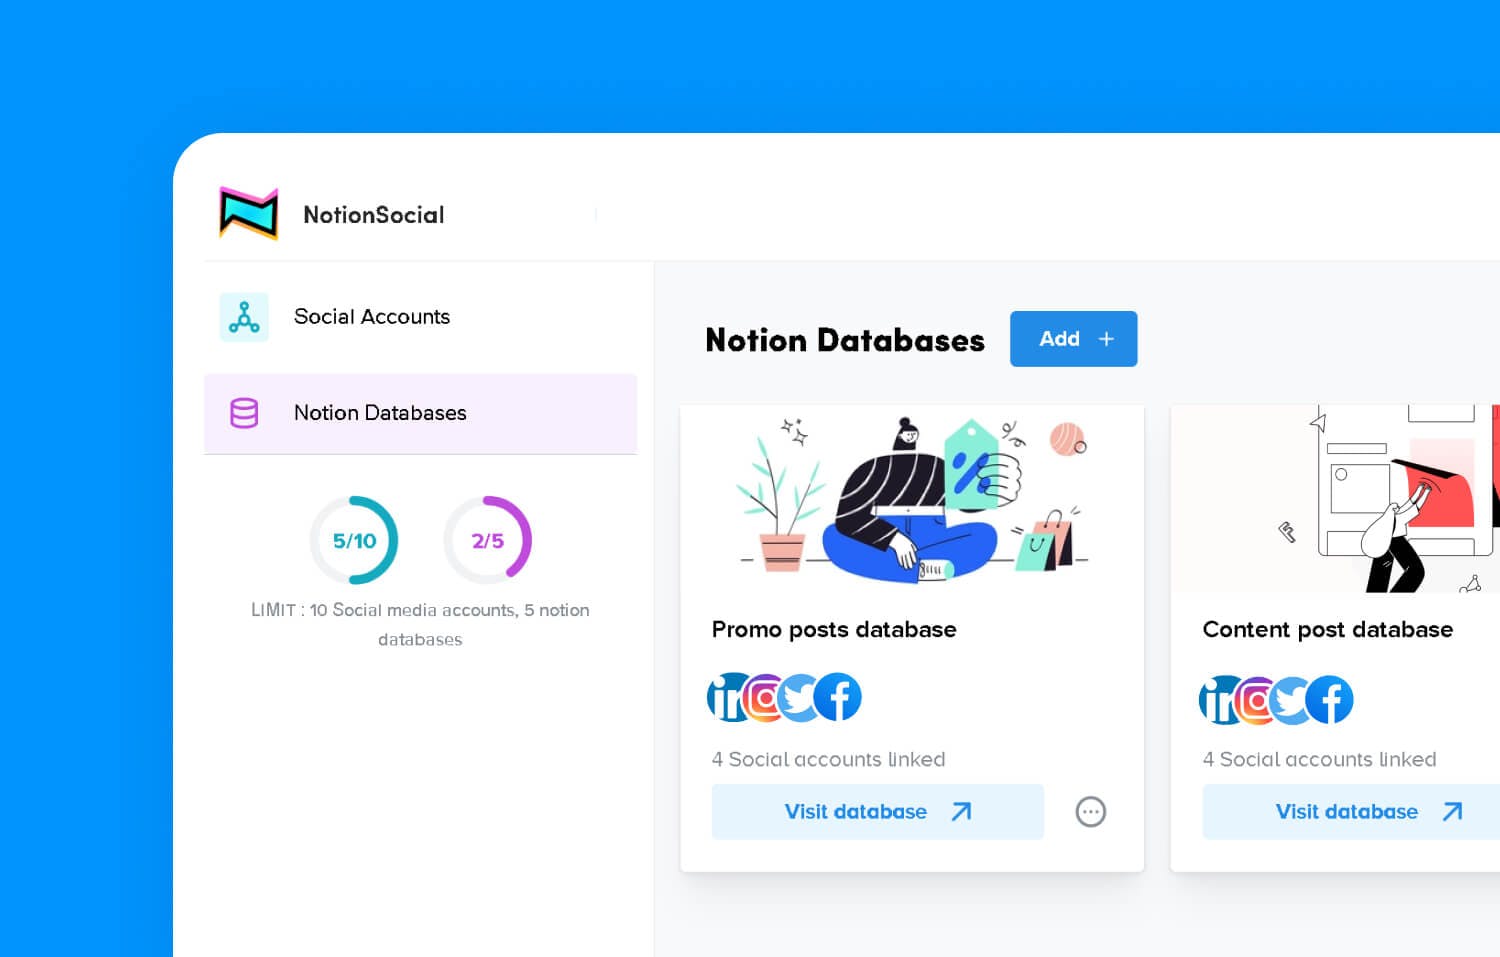 Add a notion database to notionsocial to be able to schedule posts on social media using it